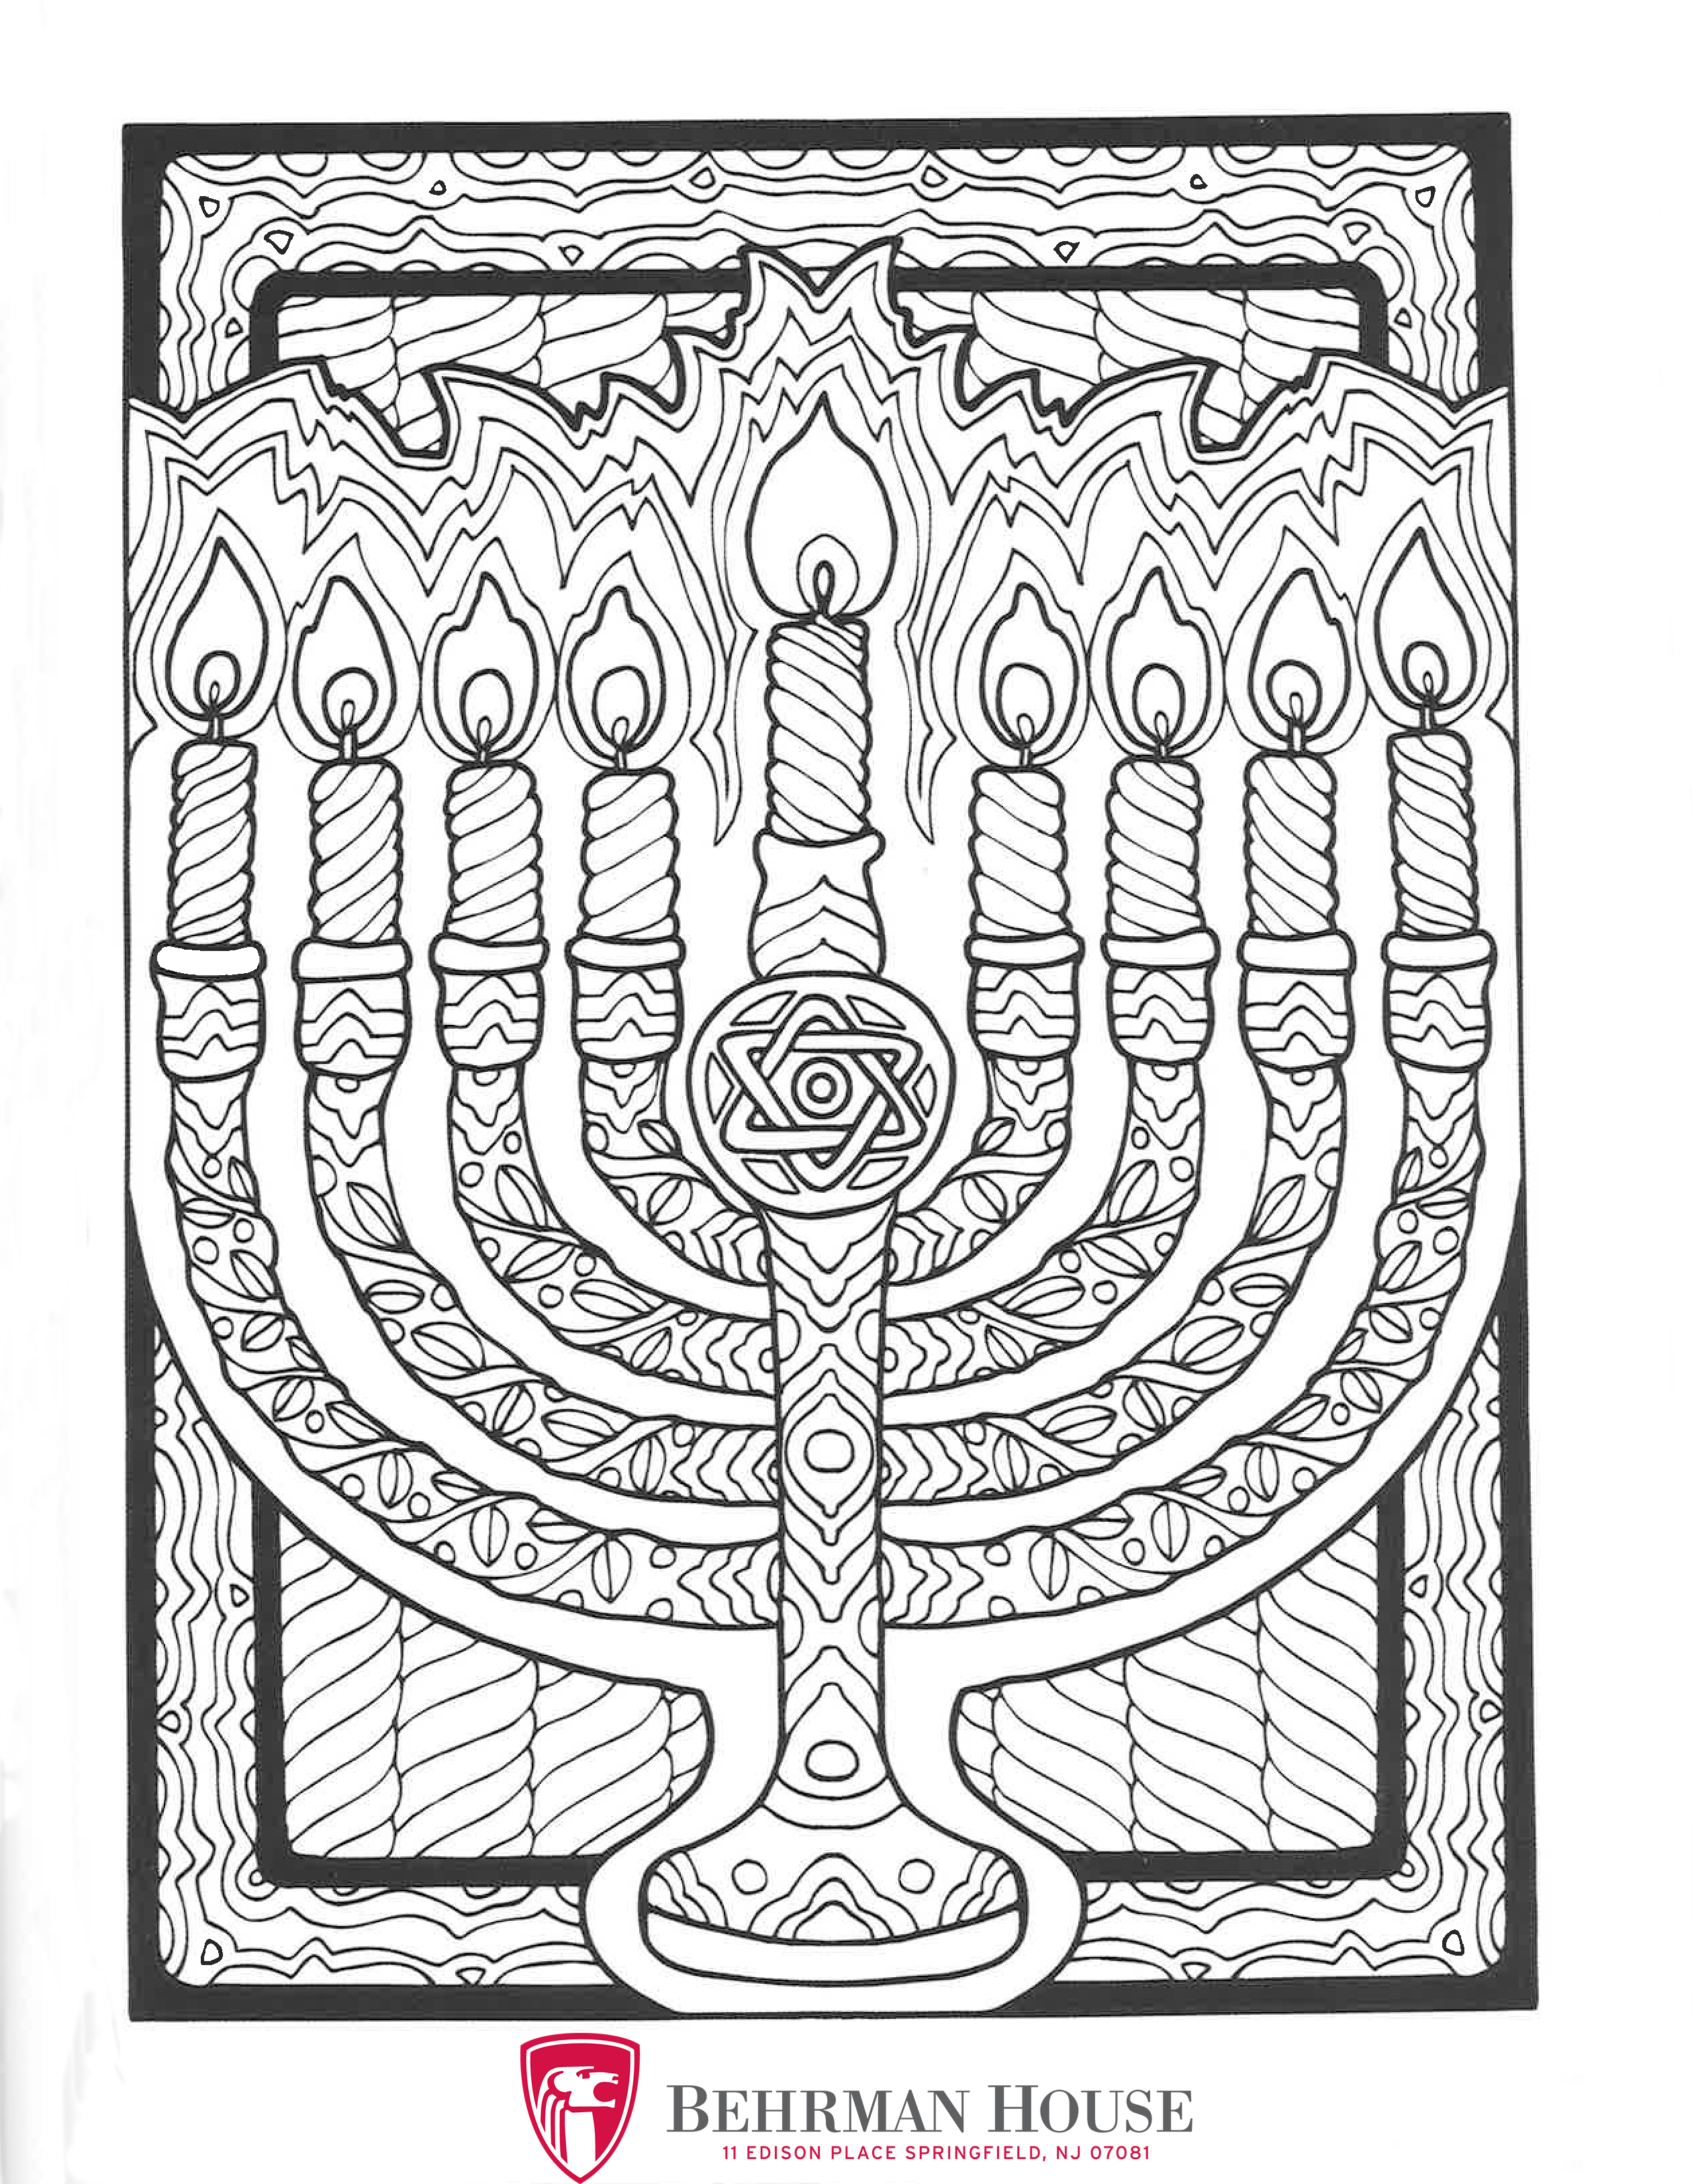 Free Hanukkah Resources for Students, Educators, and Families Behrman